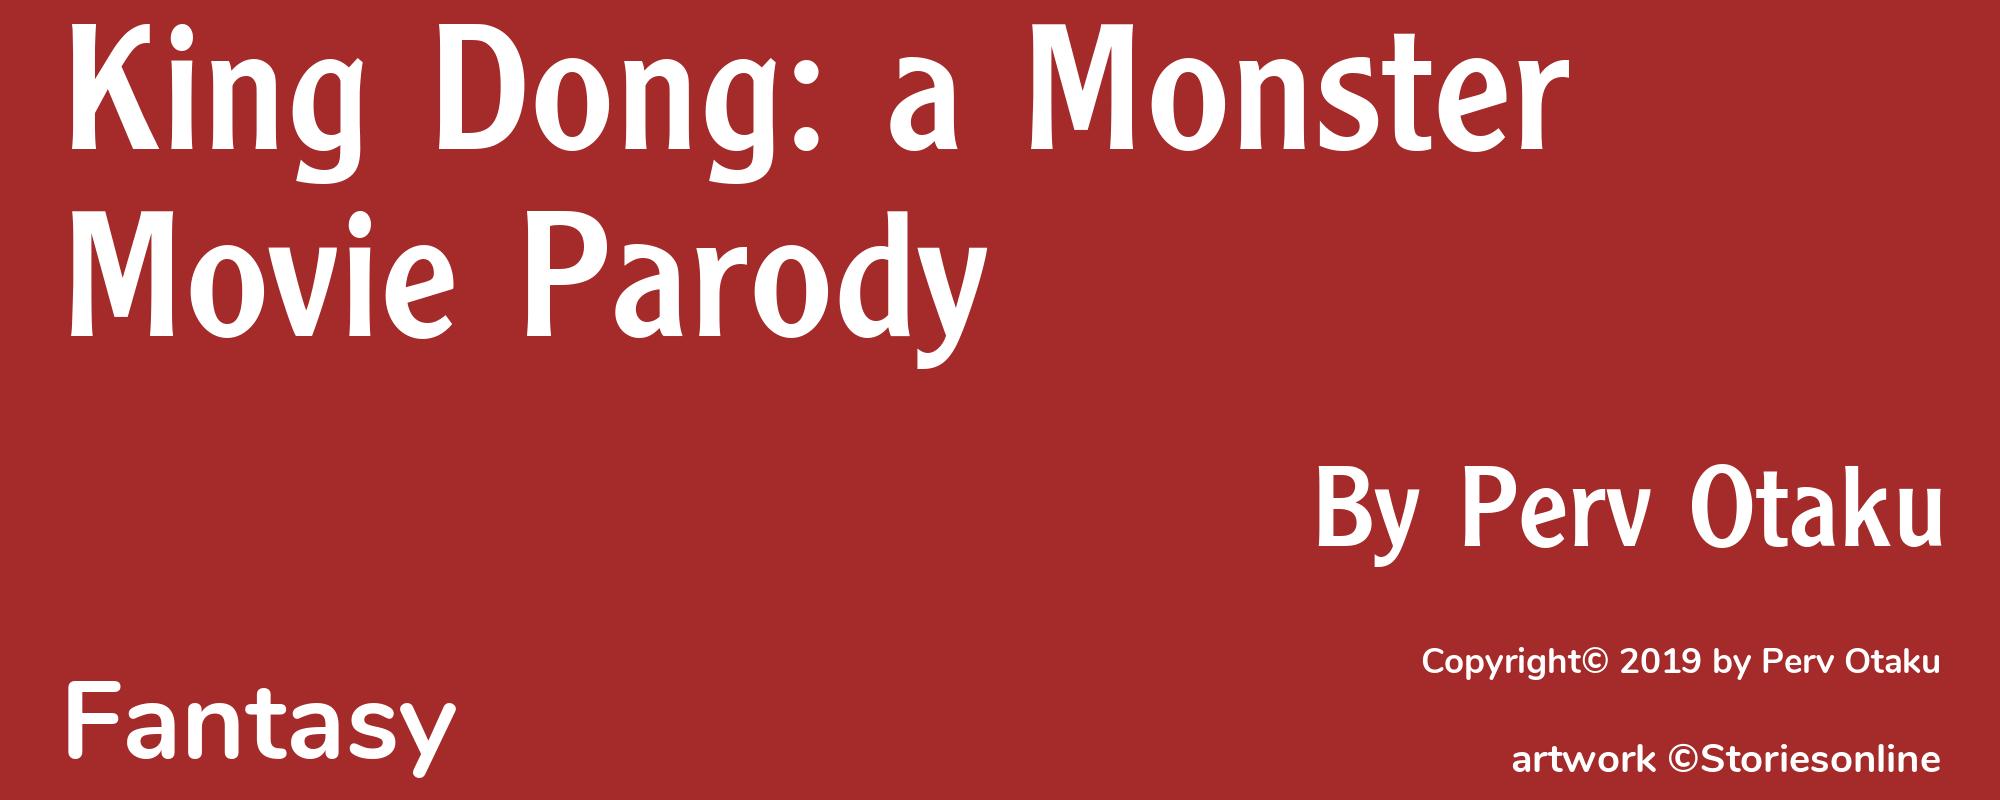 King Dong: a Monster Movie Parody - Cover